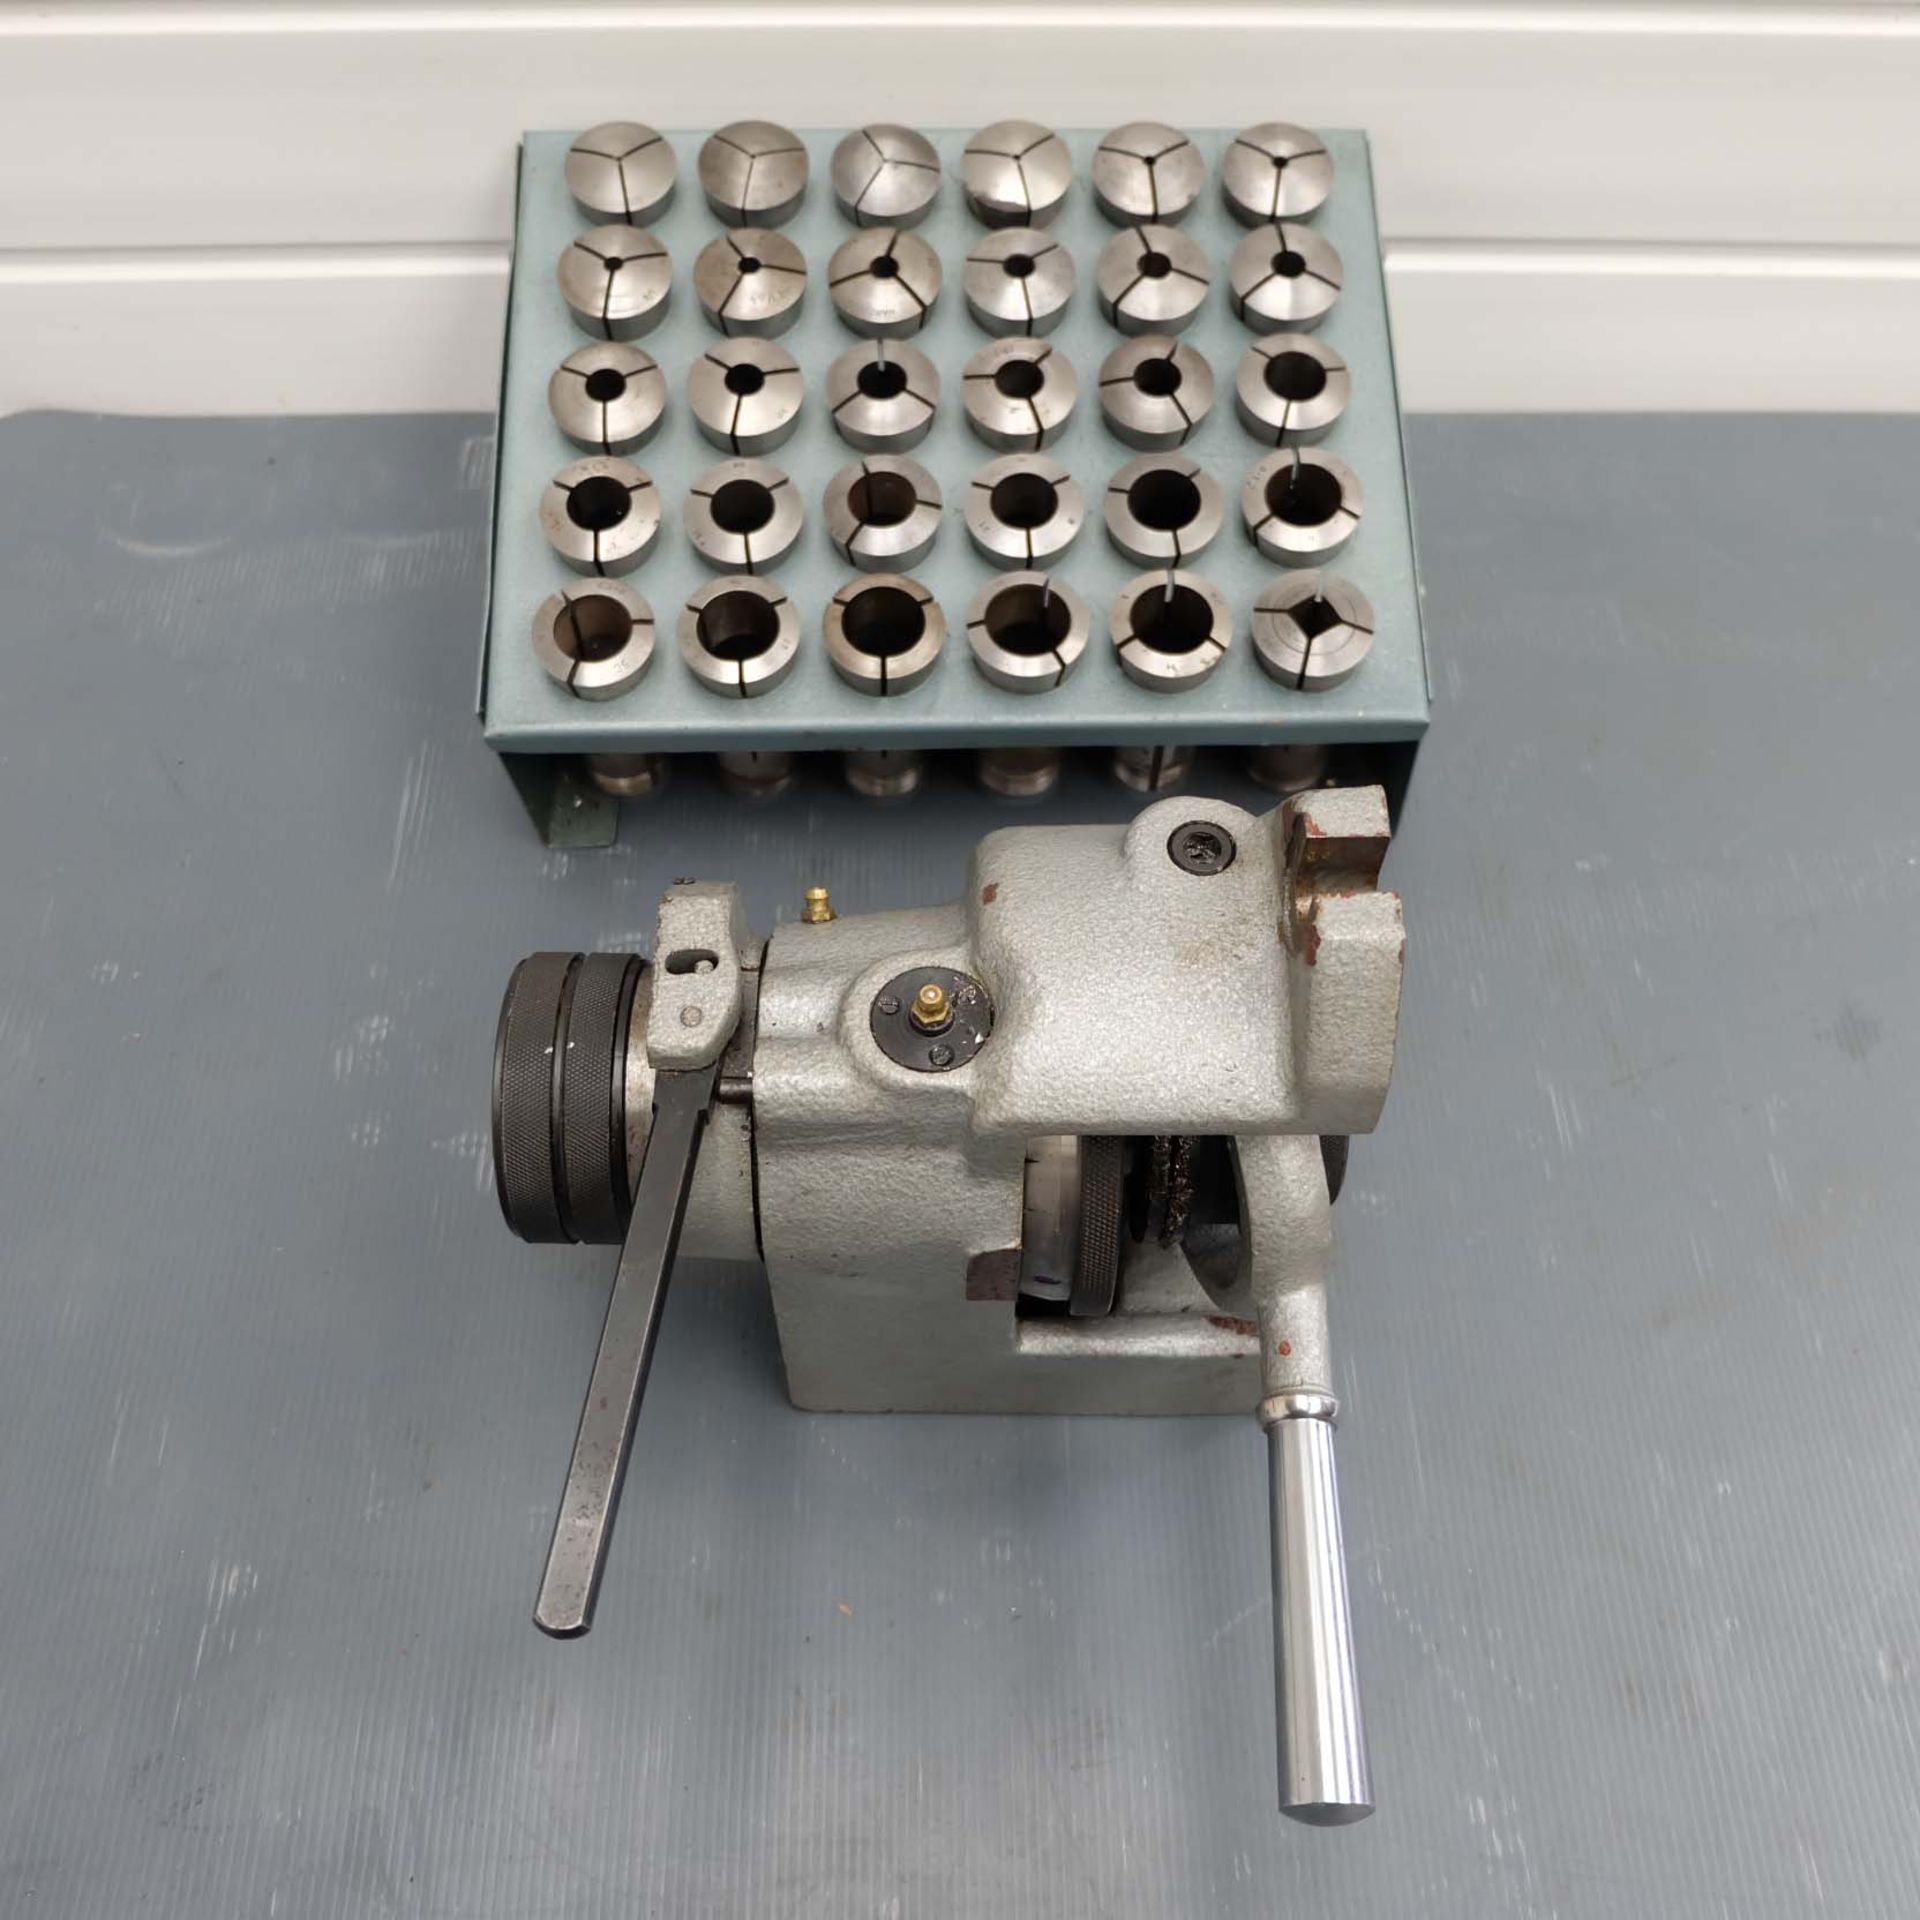 C5 Collet Indexing Fixture Horizontal & Vertical Centre Height 100mm. With 30 x C5 Collets.